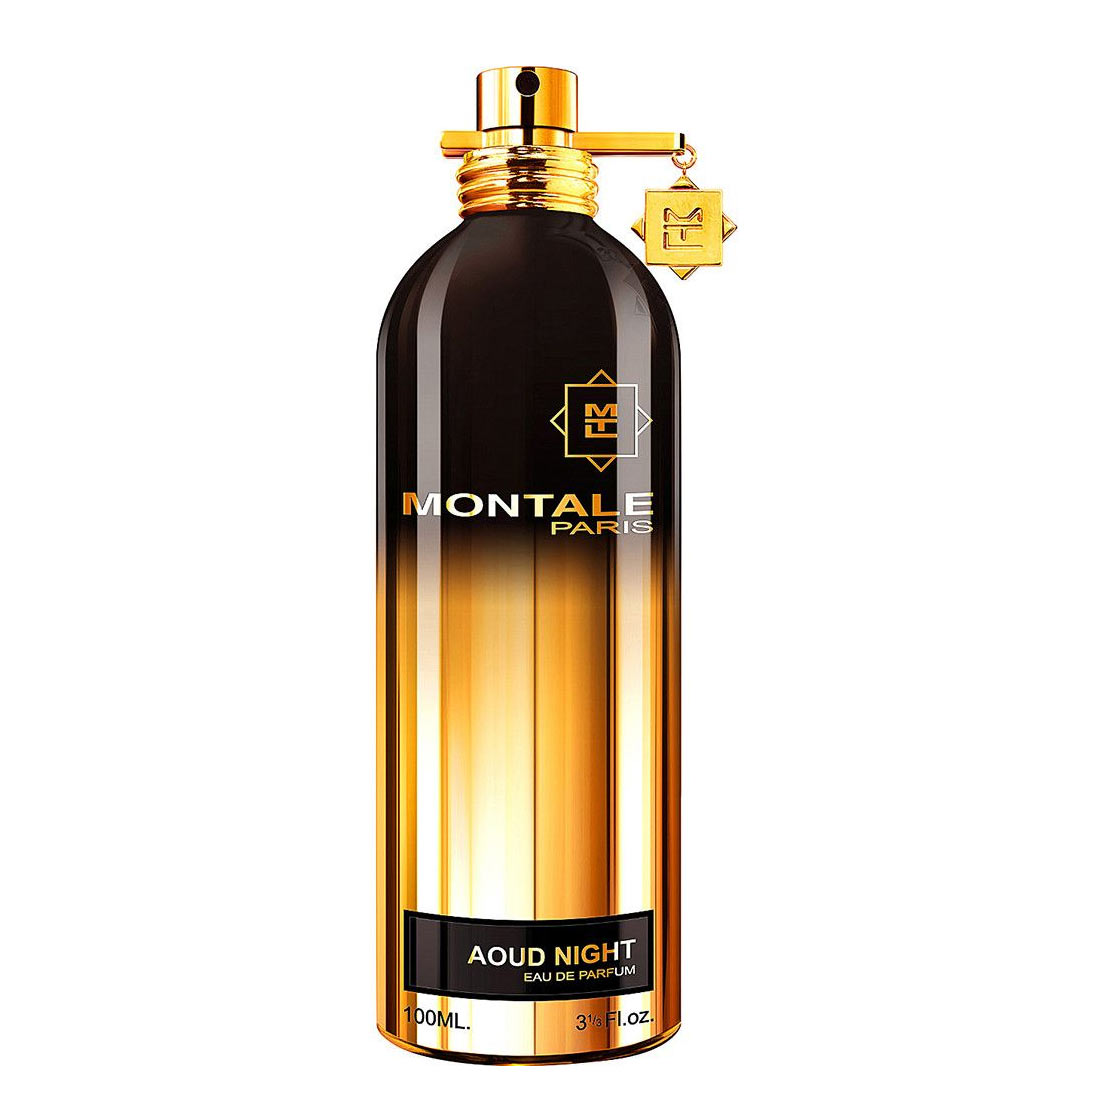 Aoud Night Montale Image